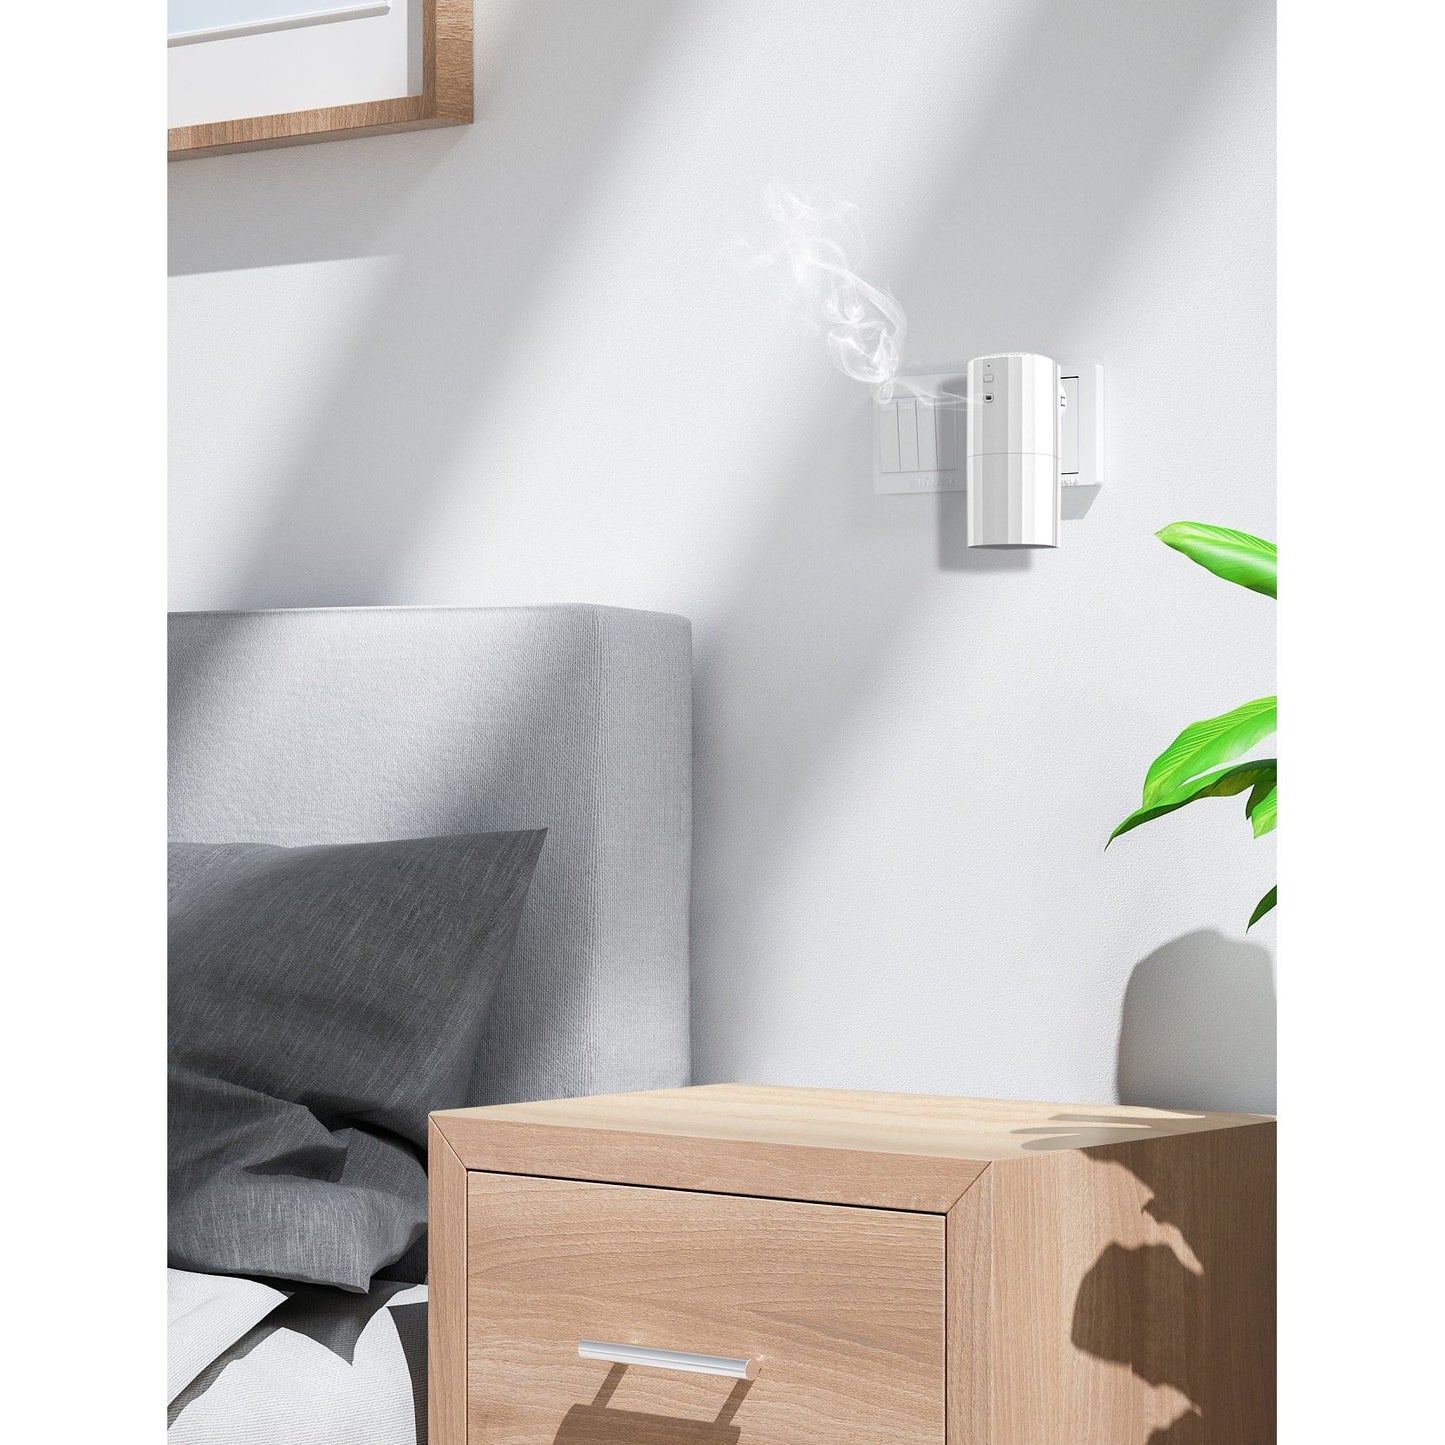 The Plug-in - Maisonscents